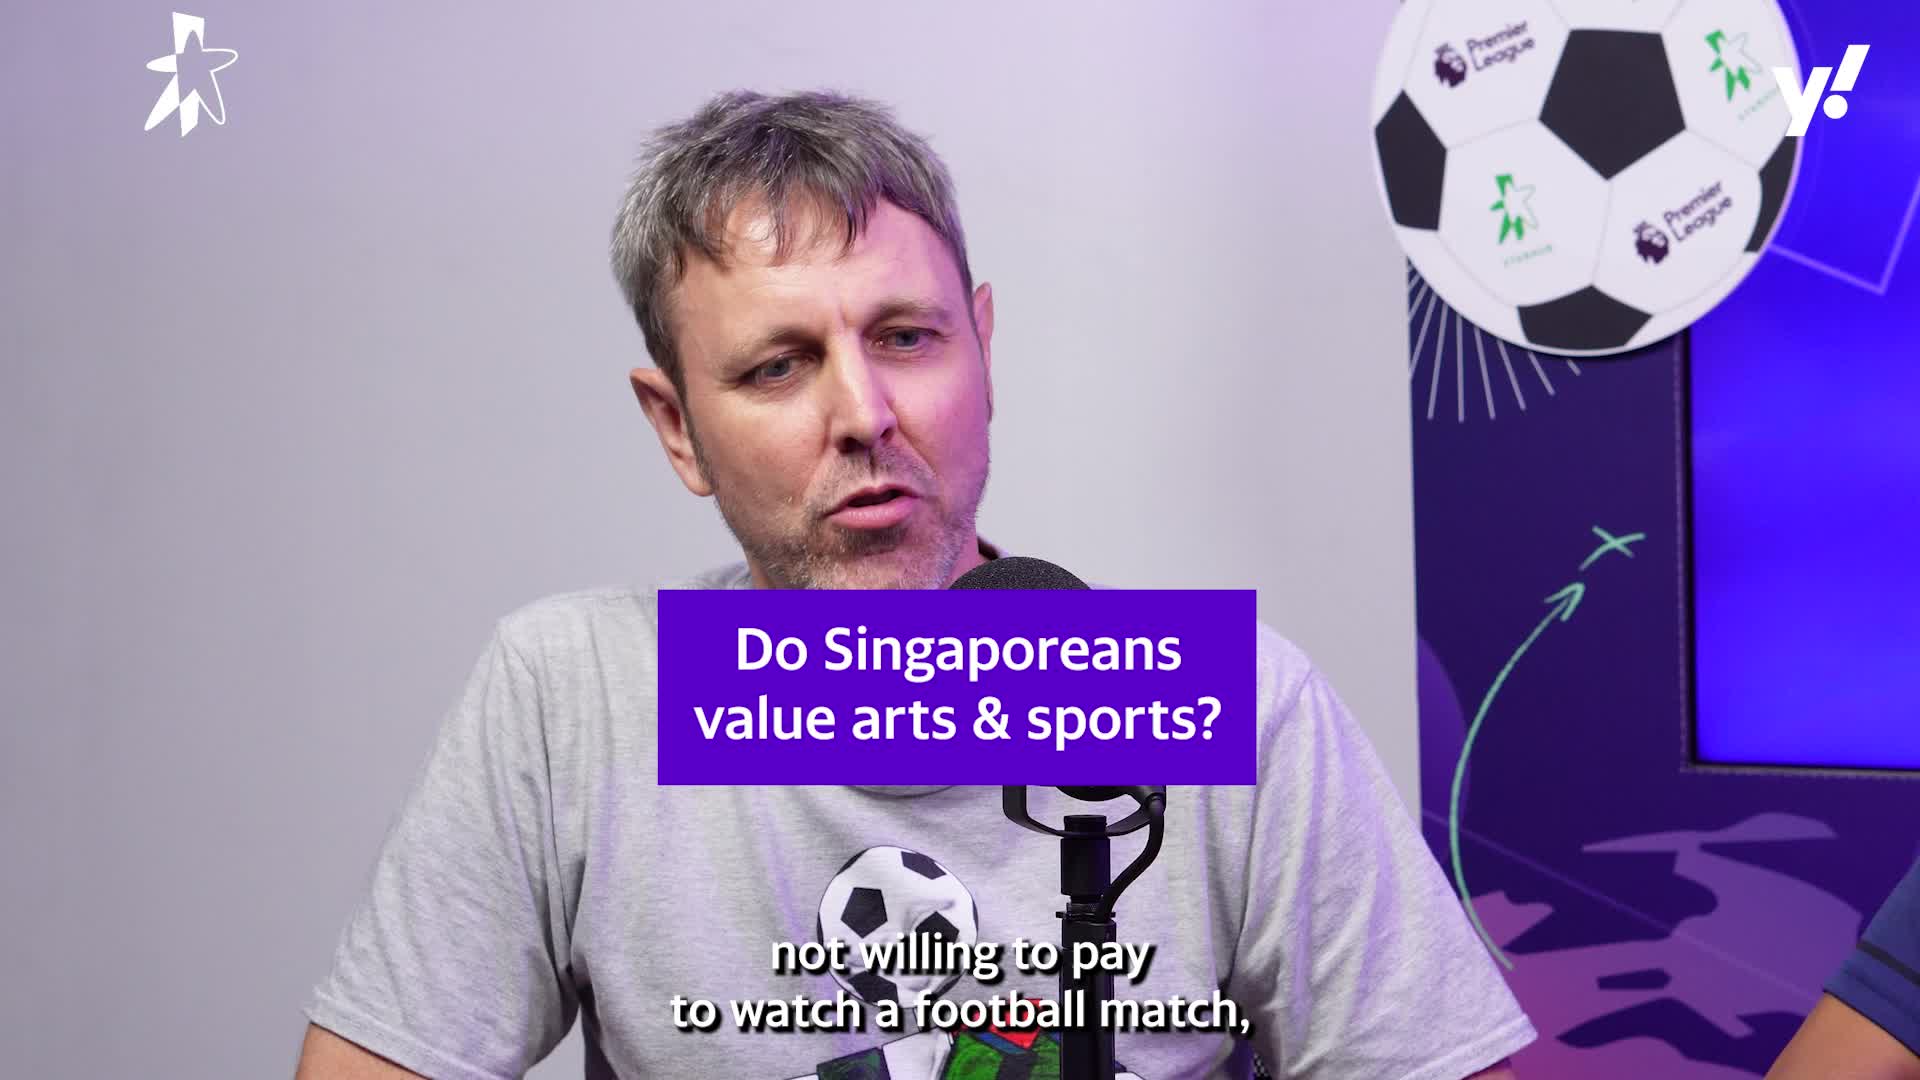 Why some Singaporeans are unwilling to pay to watch football matches